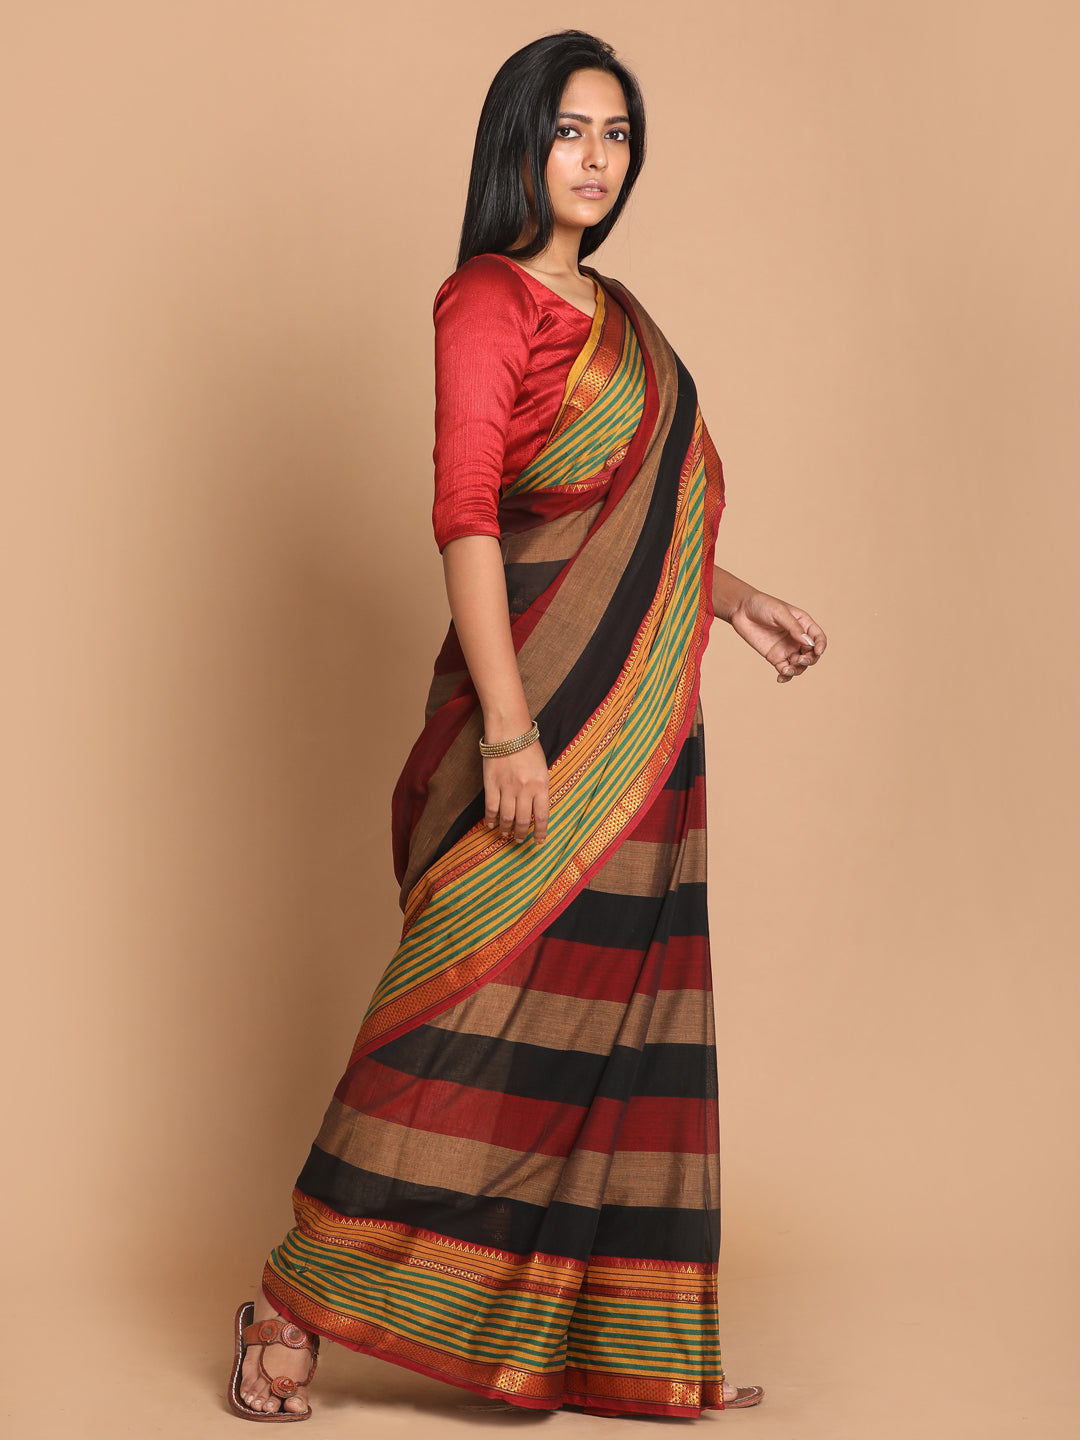 Indethnic Brown Pure Cotton Solid Saree - View 2